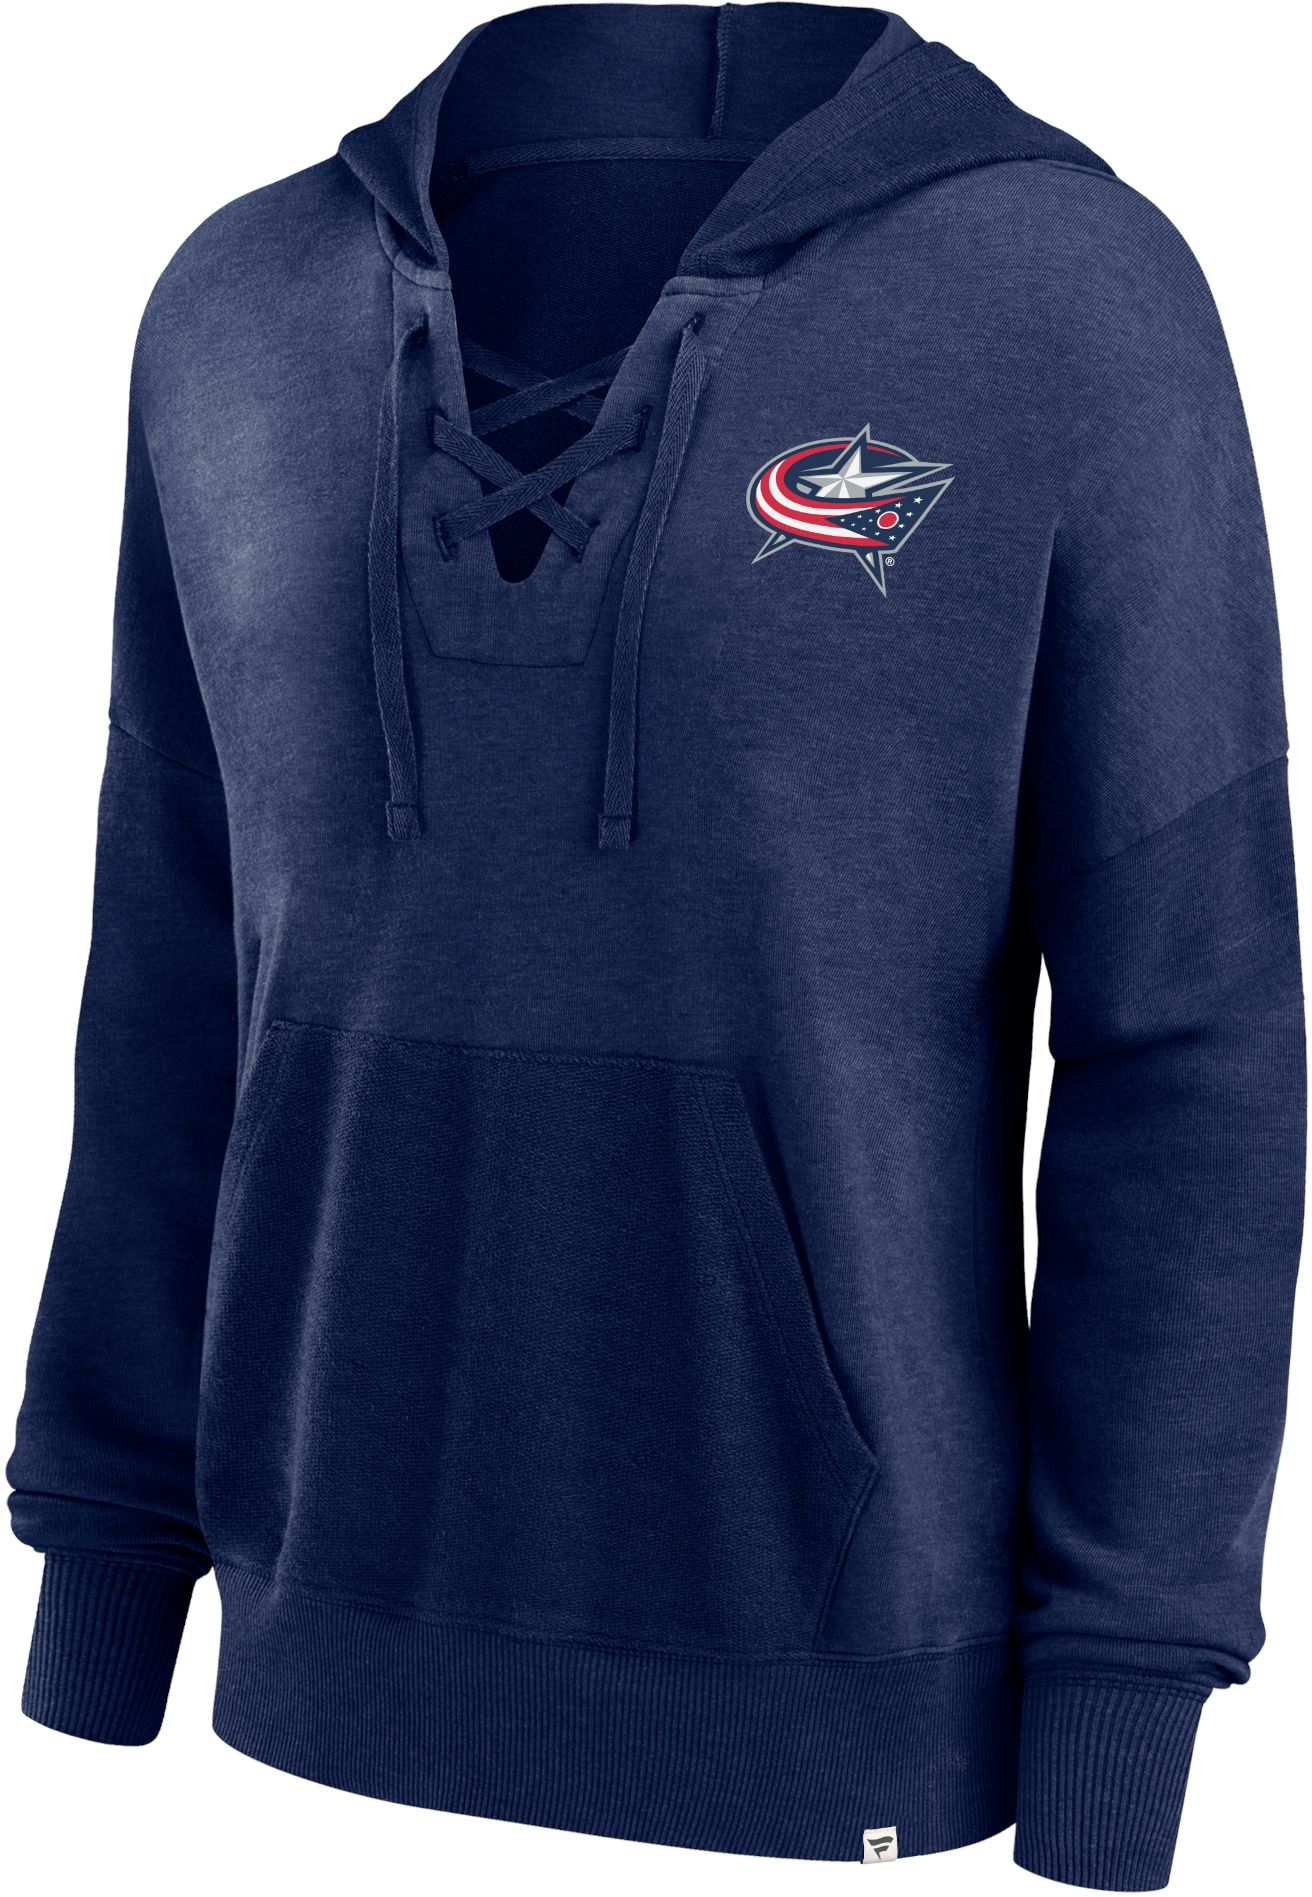 Outerstuff NHL Youth Columbus Blue Jackets Prime Alternate Red Pullover Hoodie, Boys', Medium